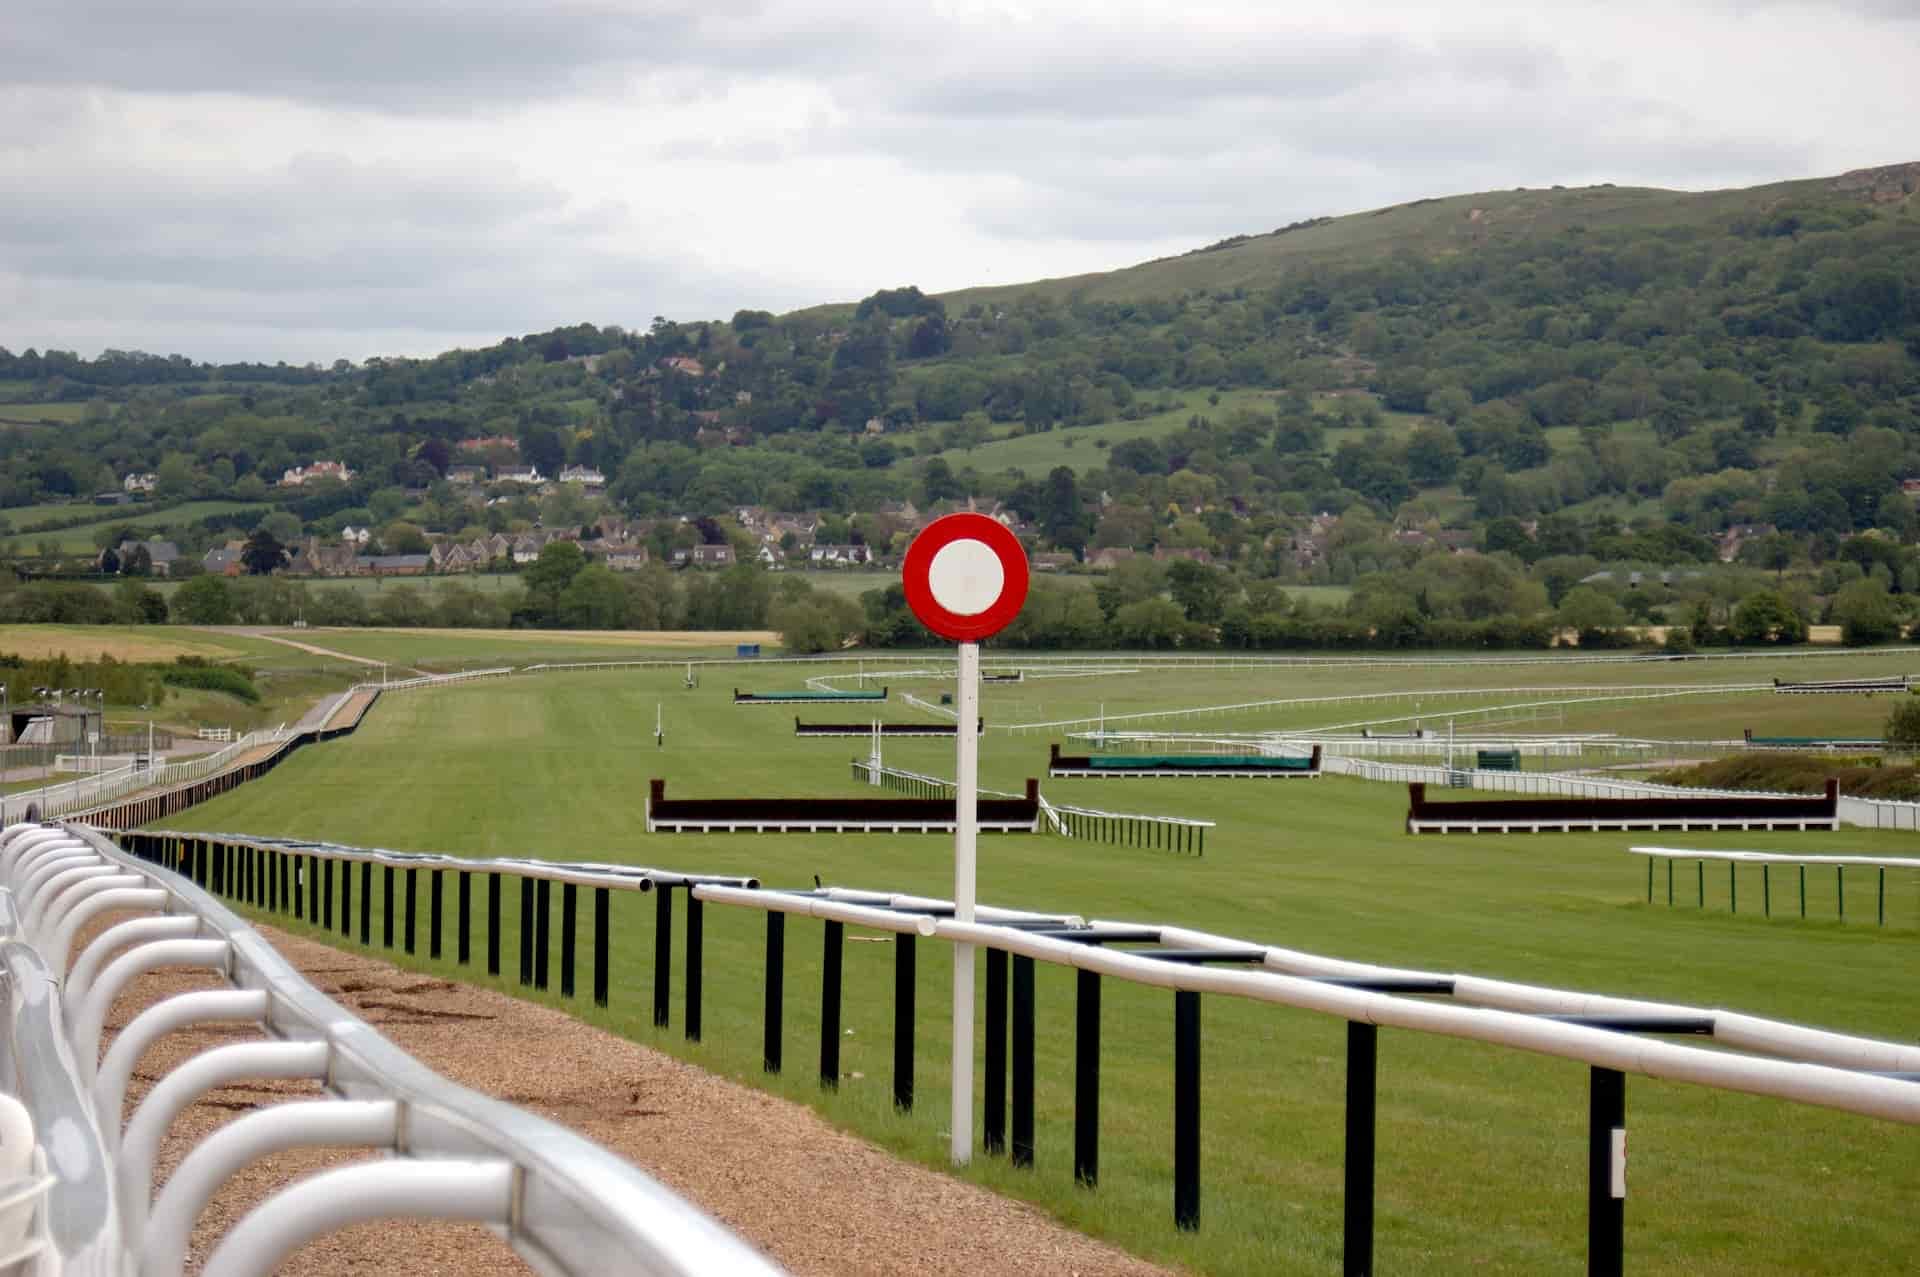 Finishing line at the Cheltenham race course